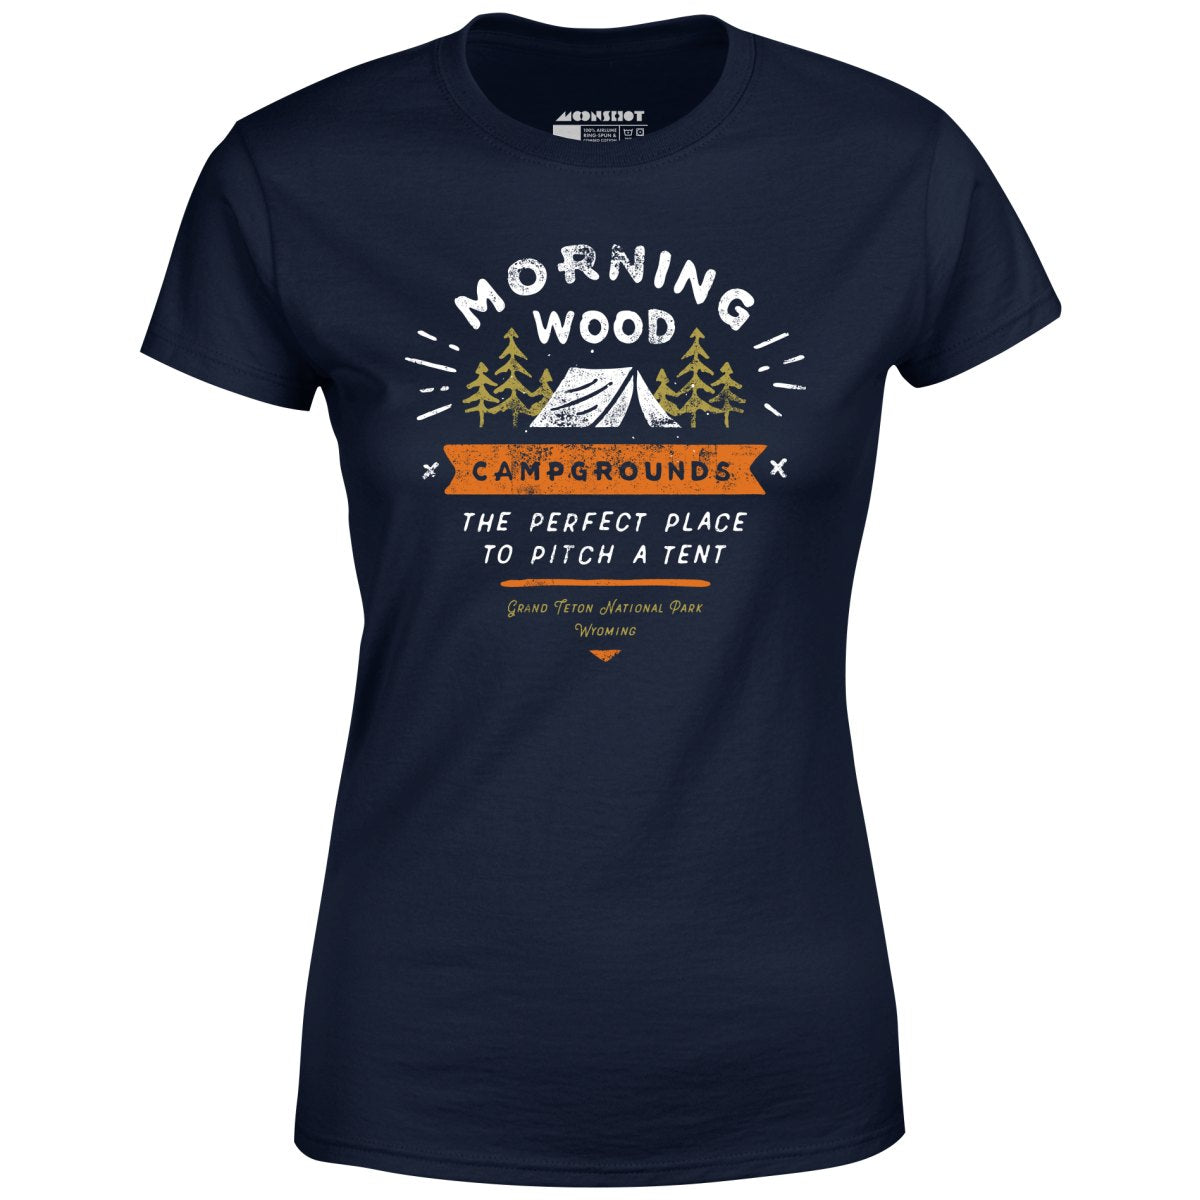 Morning Wood Campgrounds - Women's T-Shirt